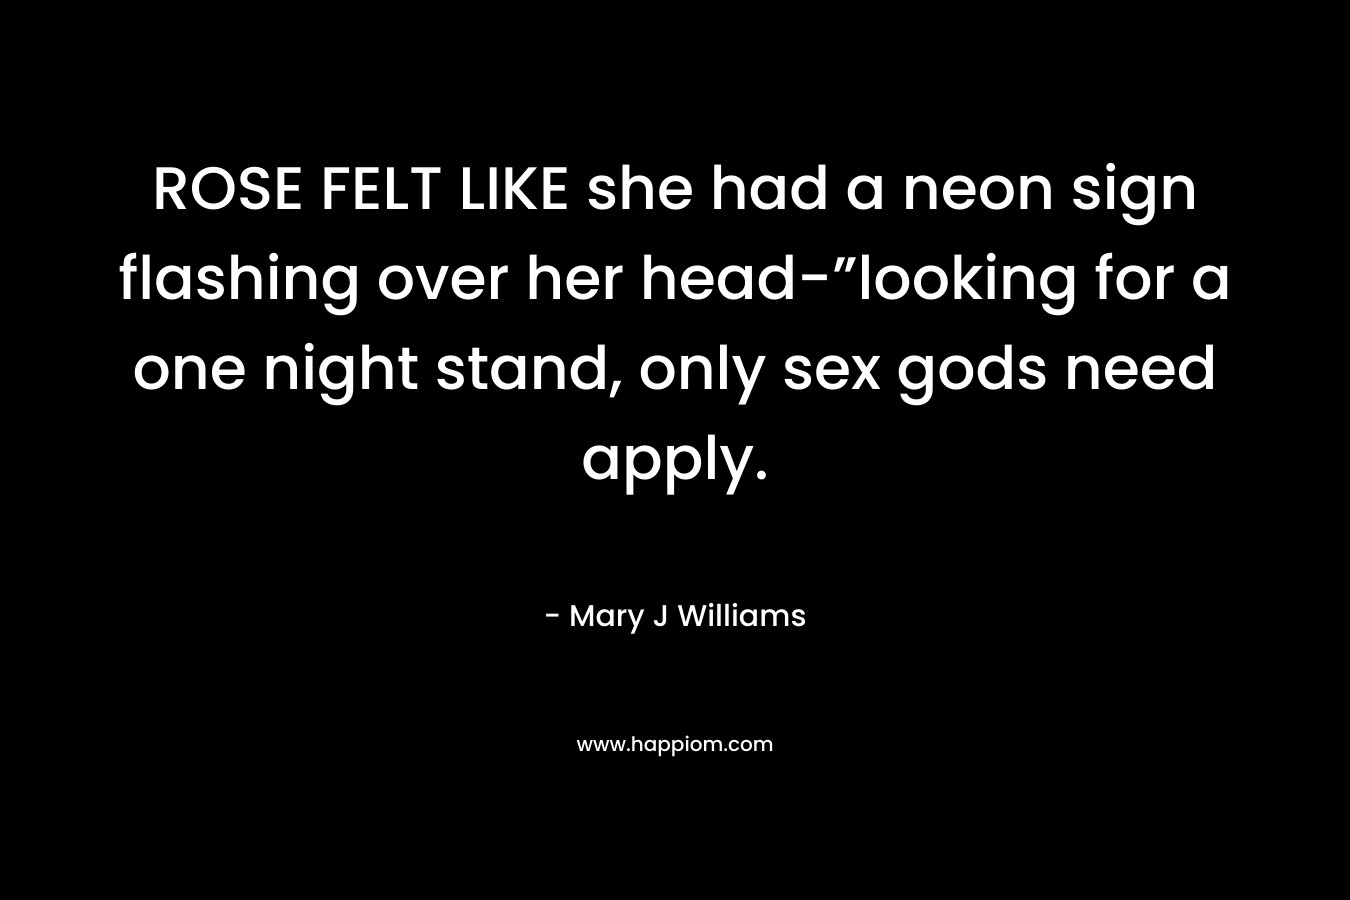 ROSE FELT LIKE she had a neon sign flashing over her head-”looking for a one night stand, only sex gods need apply. – Mary J Williams